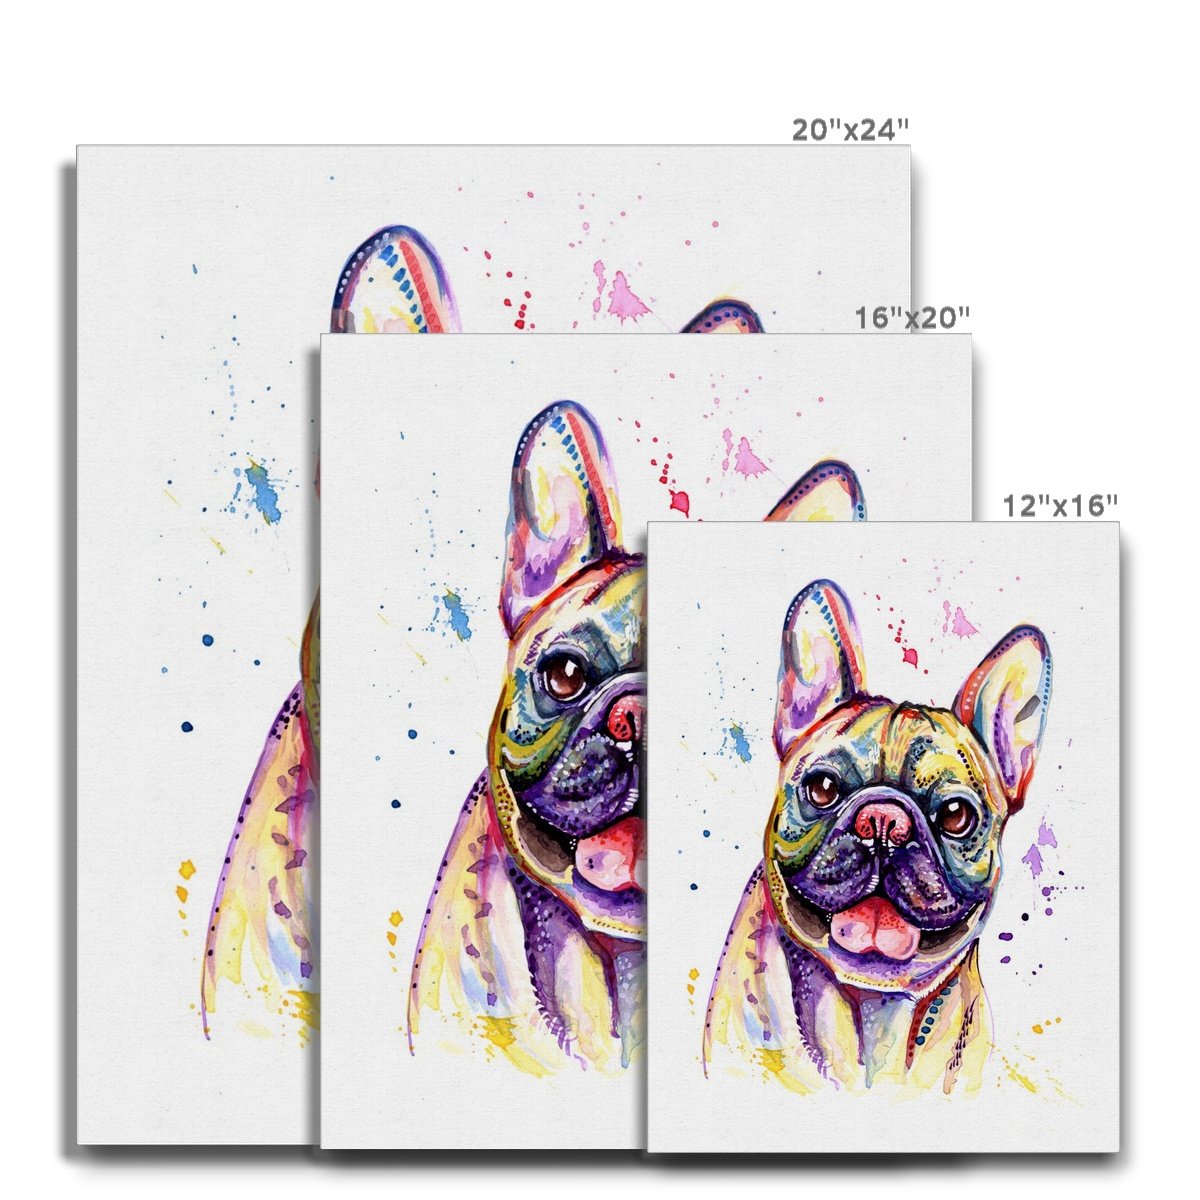 French Bulldog Canvasses size guides